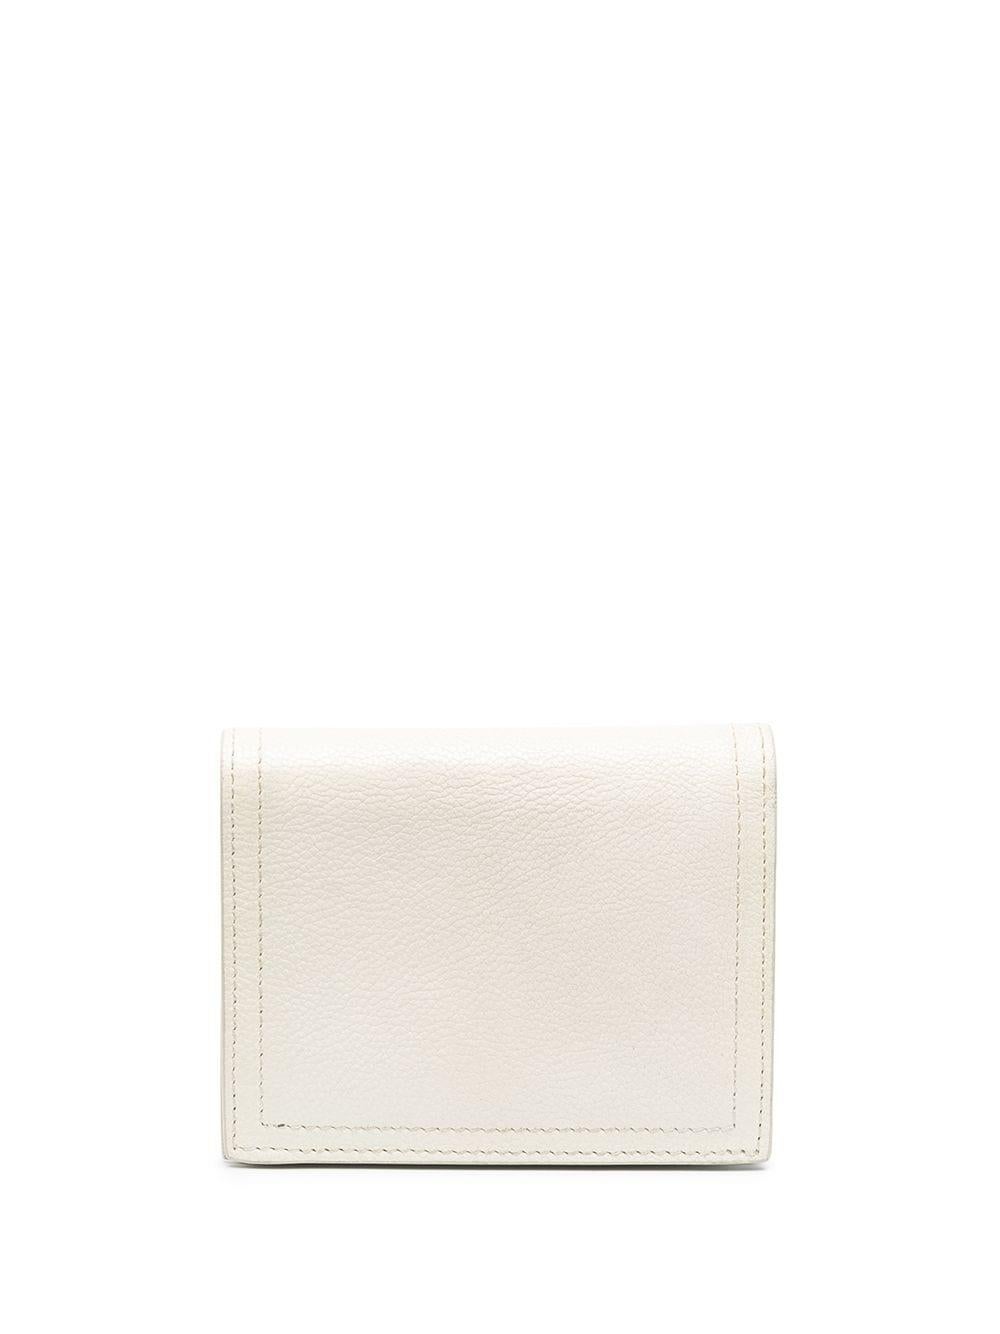 Beautifully sweet and simple coin purse from Prada in off-white leather. The purse opens up to card slots, and a contrasting blue coin section, as well as a notes compartment along the top. For security, the purse closes with a snap button.

Colour: